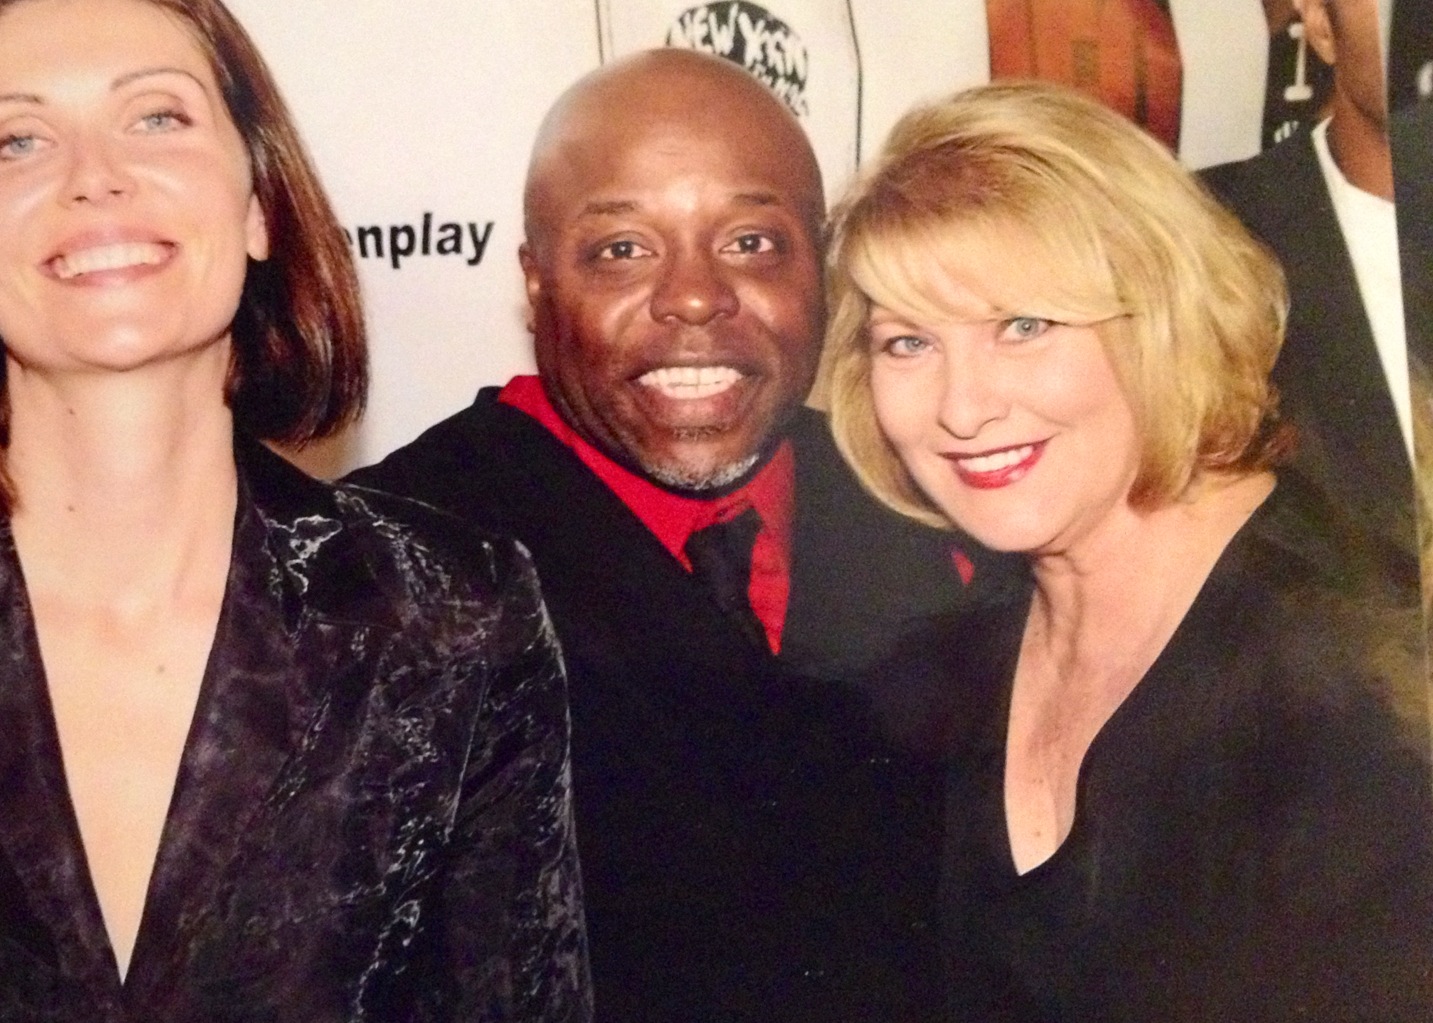 Catherine Carlen,Yelena Popovic and Dannon Green at The NY Film Festival in Beverly Hills. NYIFF